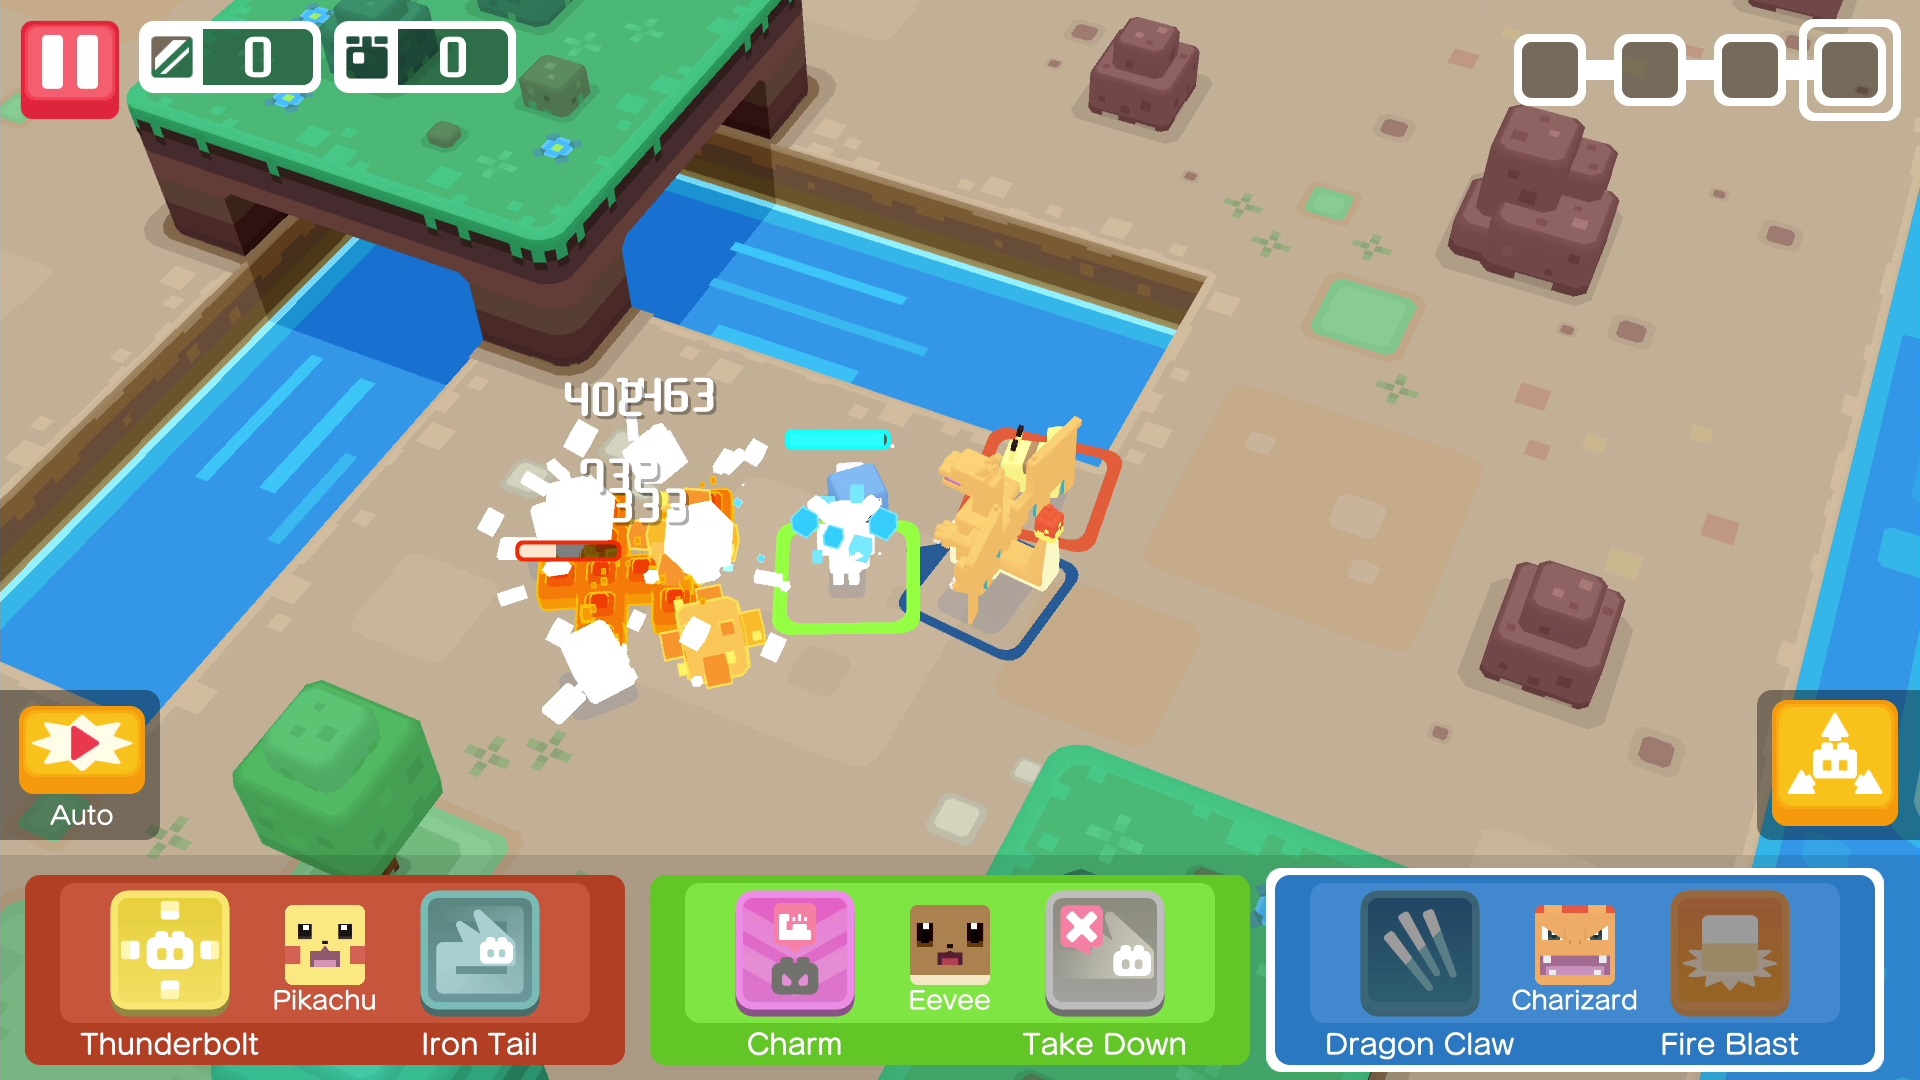 Decorations for your Base Camp in Pokémon Quest - Play Nintendo